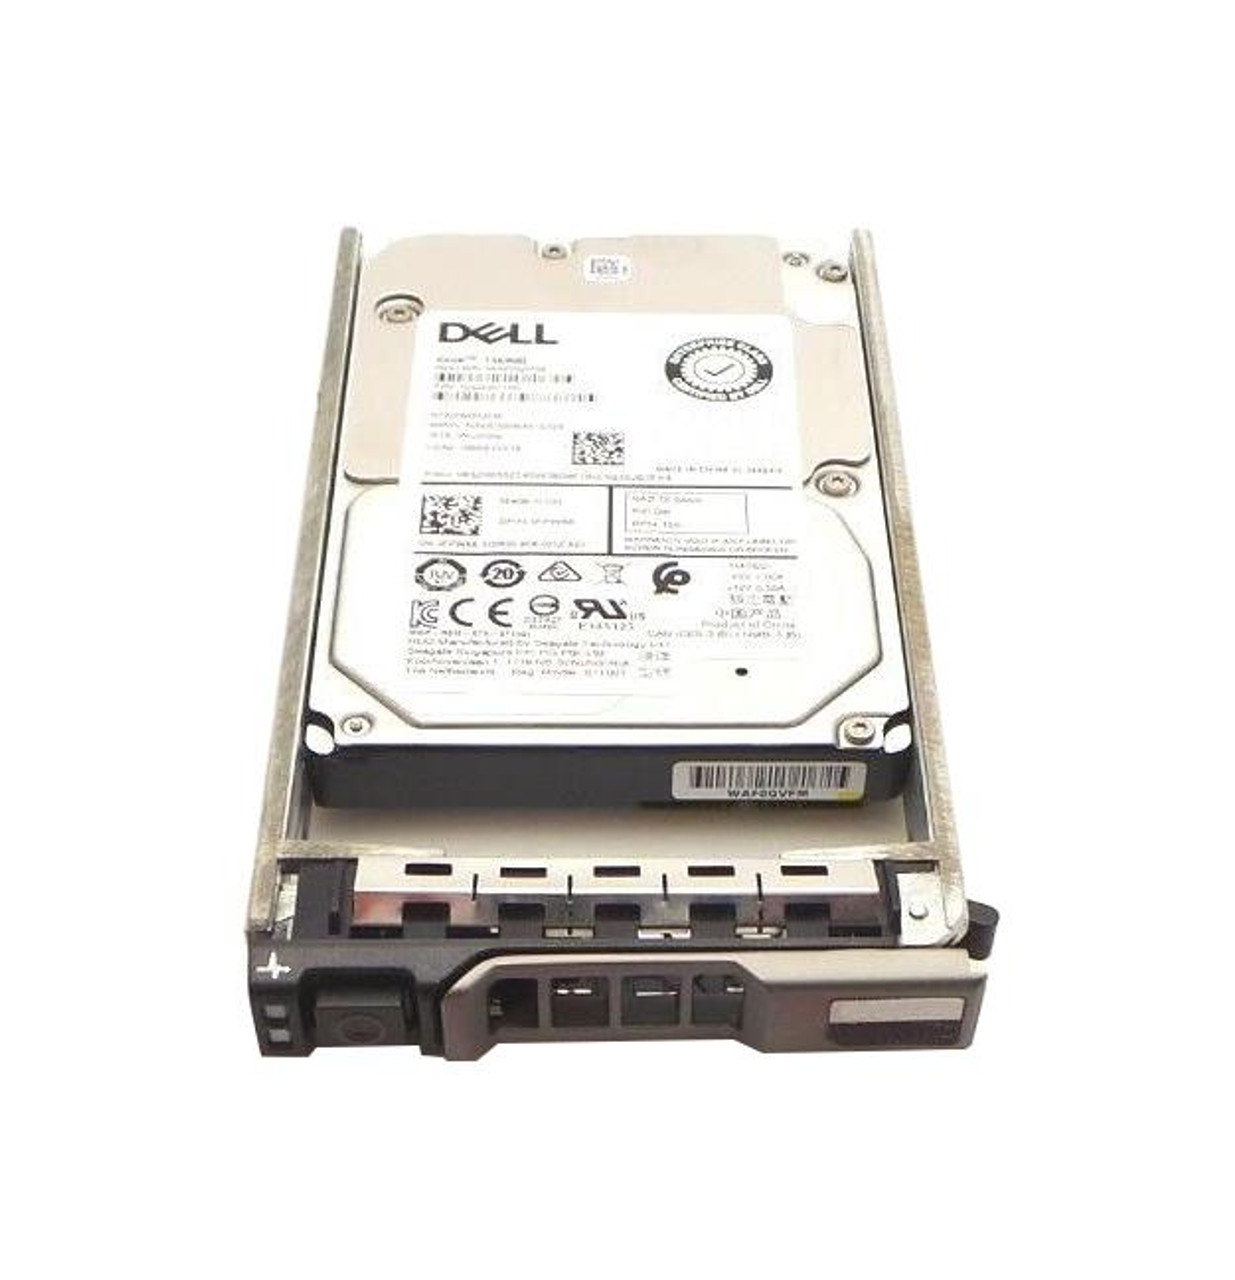 342-4358 Dell 320GB 7200RPM SATA 6Gbps 2.5-inch Internal Hard Drive with Tray